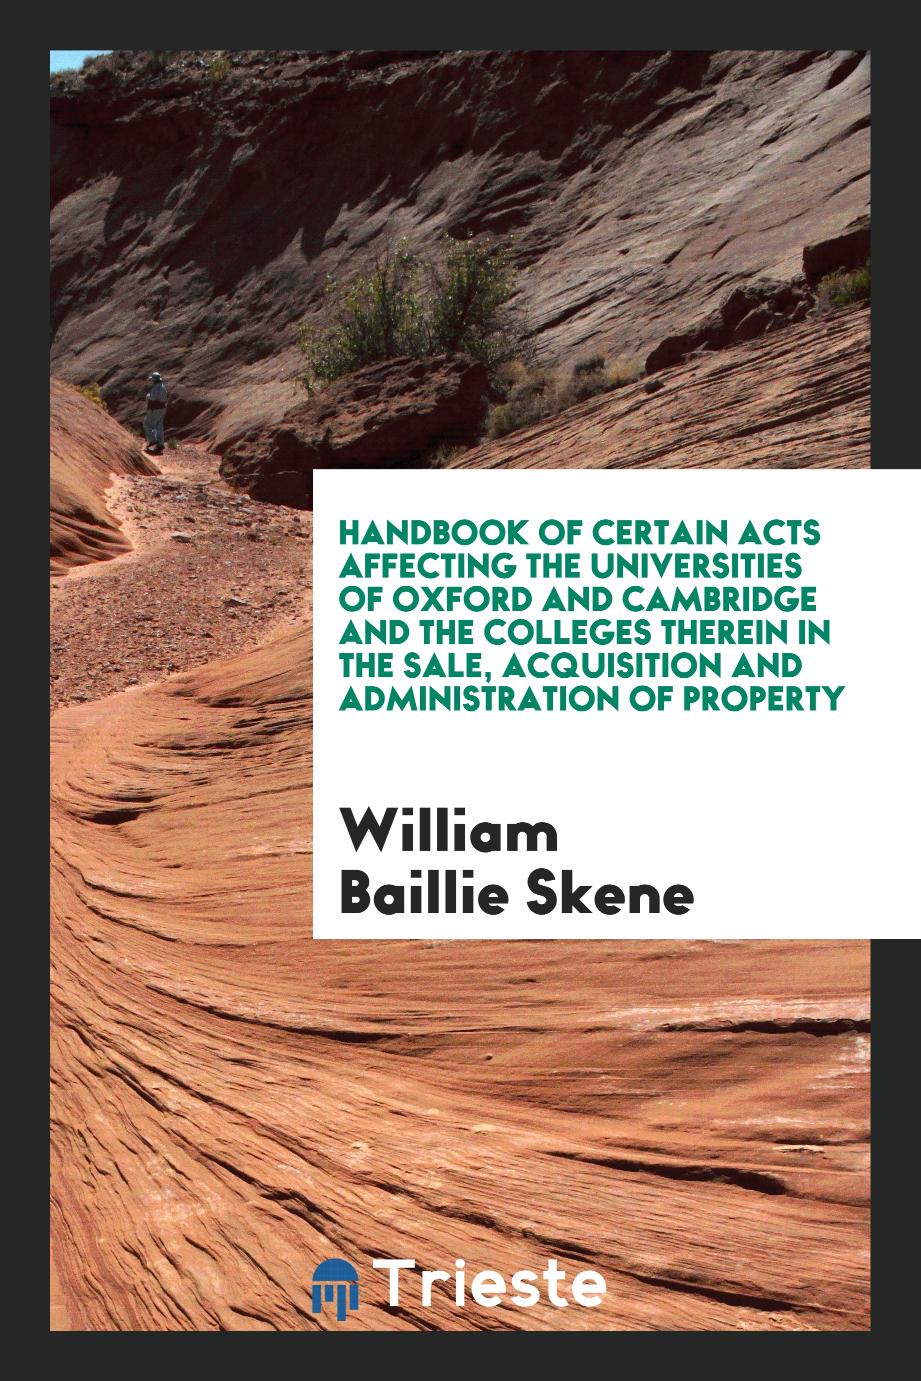 Handbook of Certain Acts Affecting the Universities of Oxford and Cambridge and the Colleges Therein in the Sale, Acquisition and Administration of Property